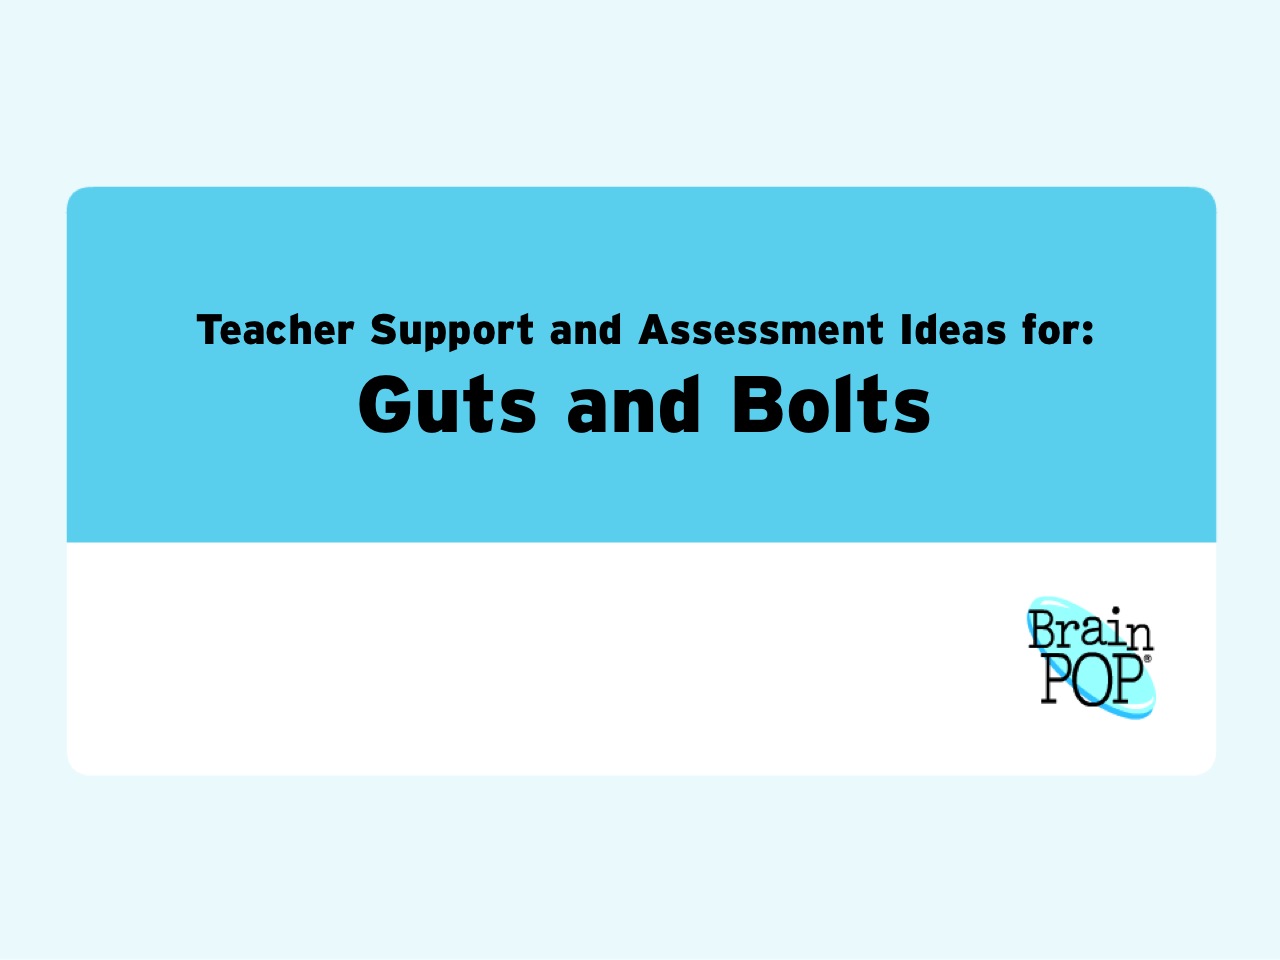 Teacher Resources and Assessment Strategies for Guts and Bolts